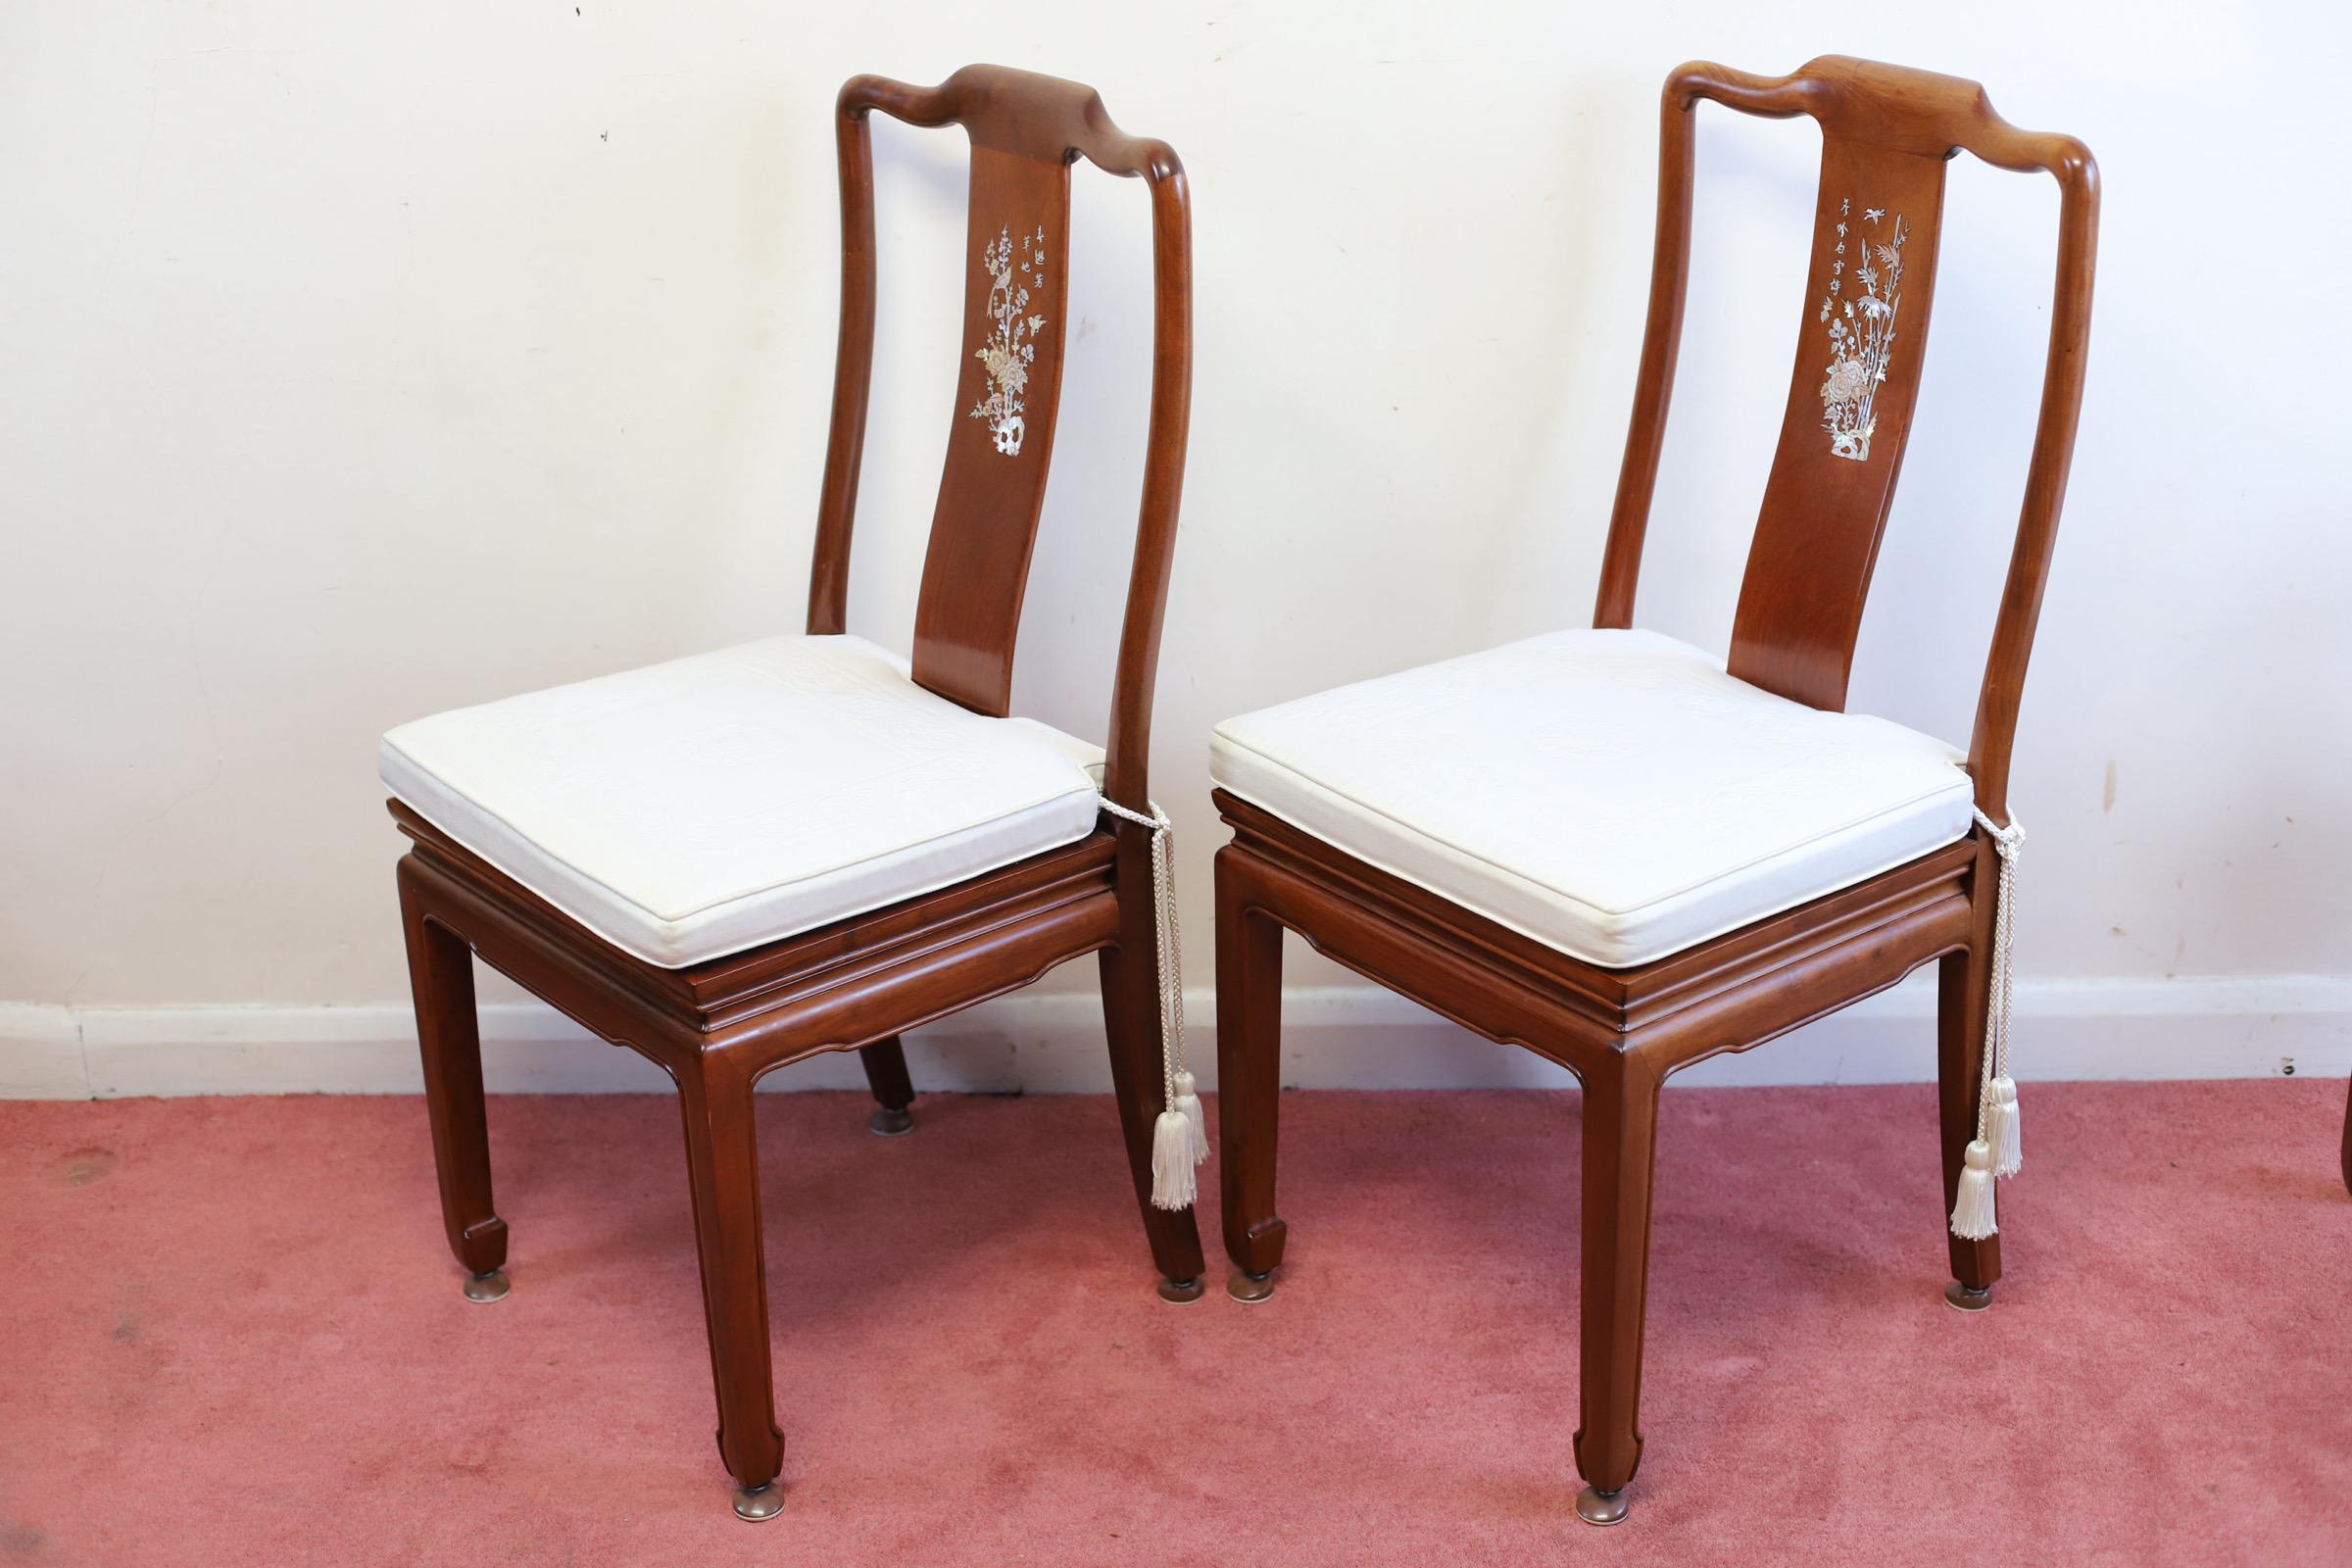 Stunning Asian Hardwood And Mother-of-pearl Inset Dining Table And Eight Chairs For Sale 2